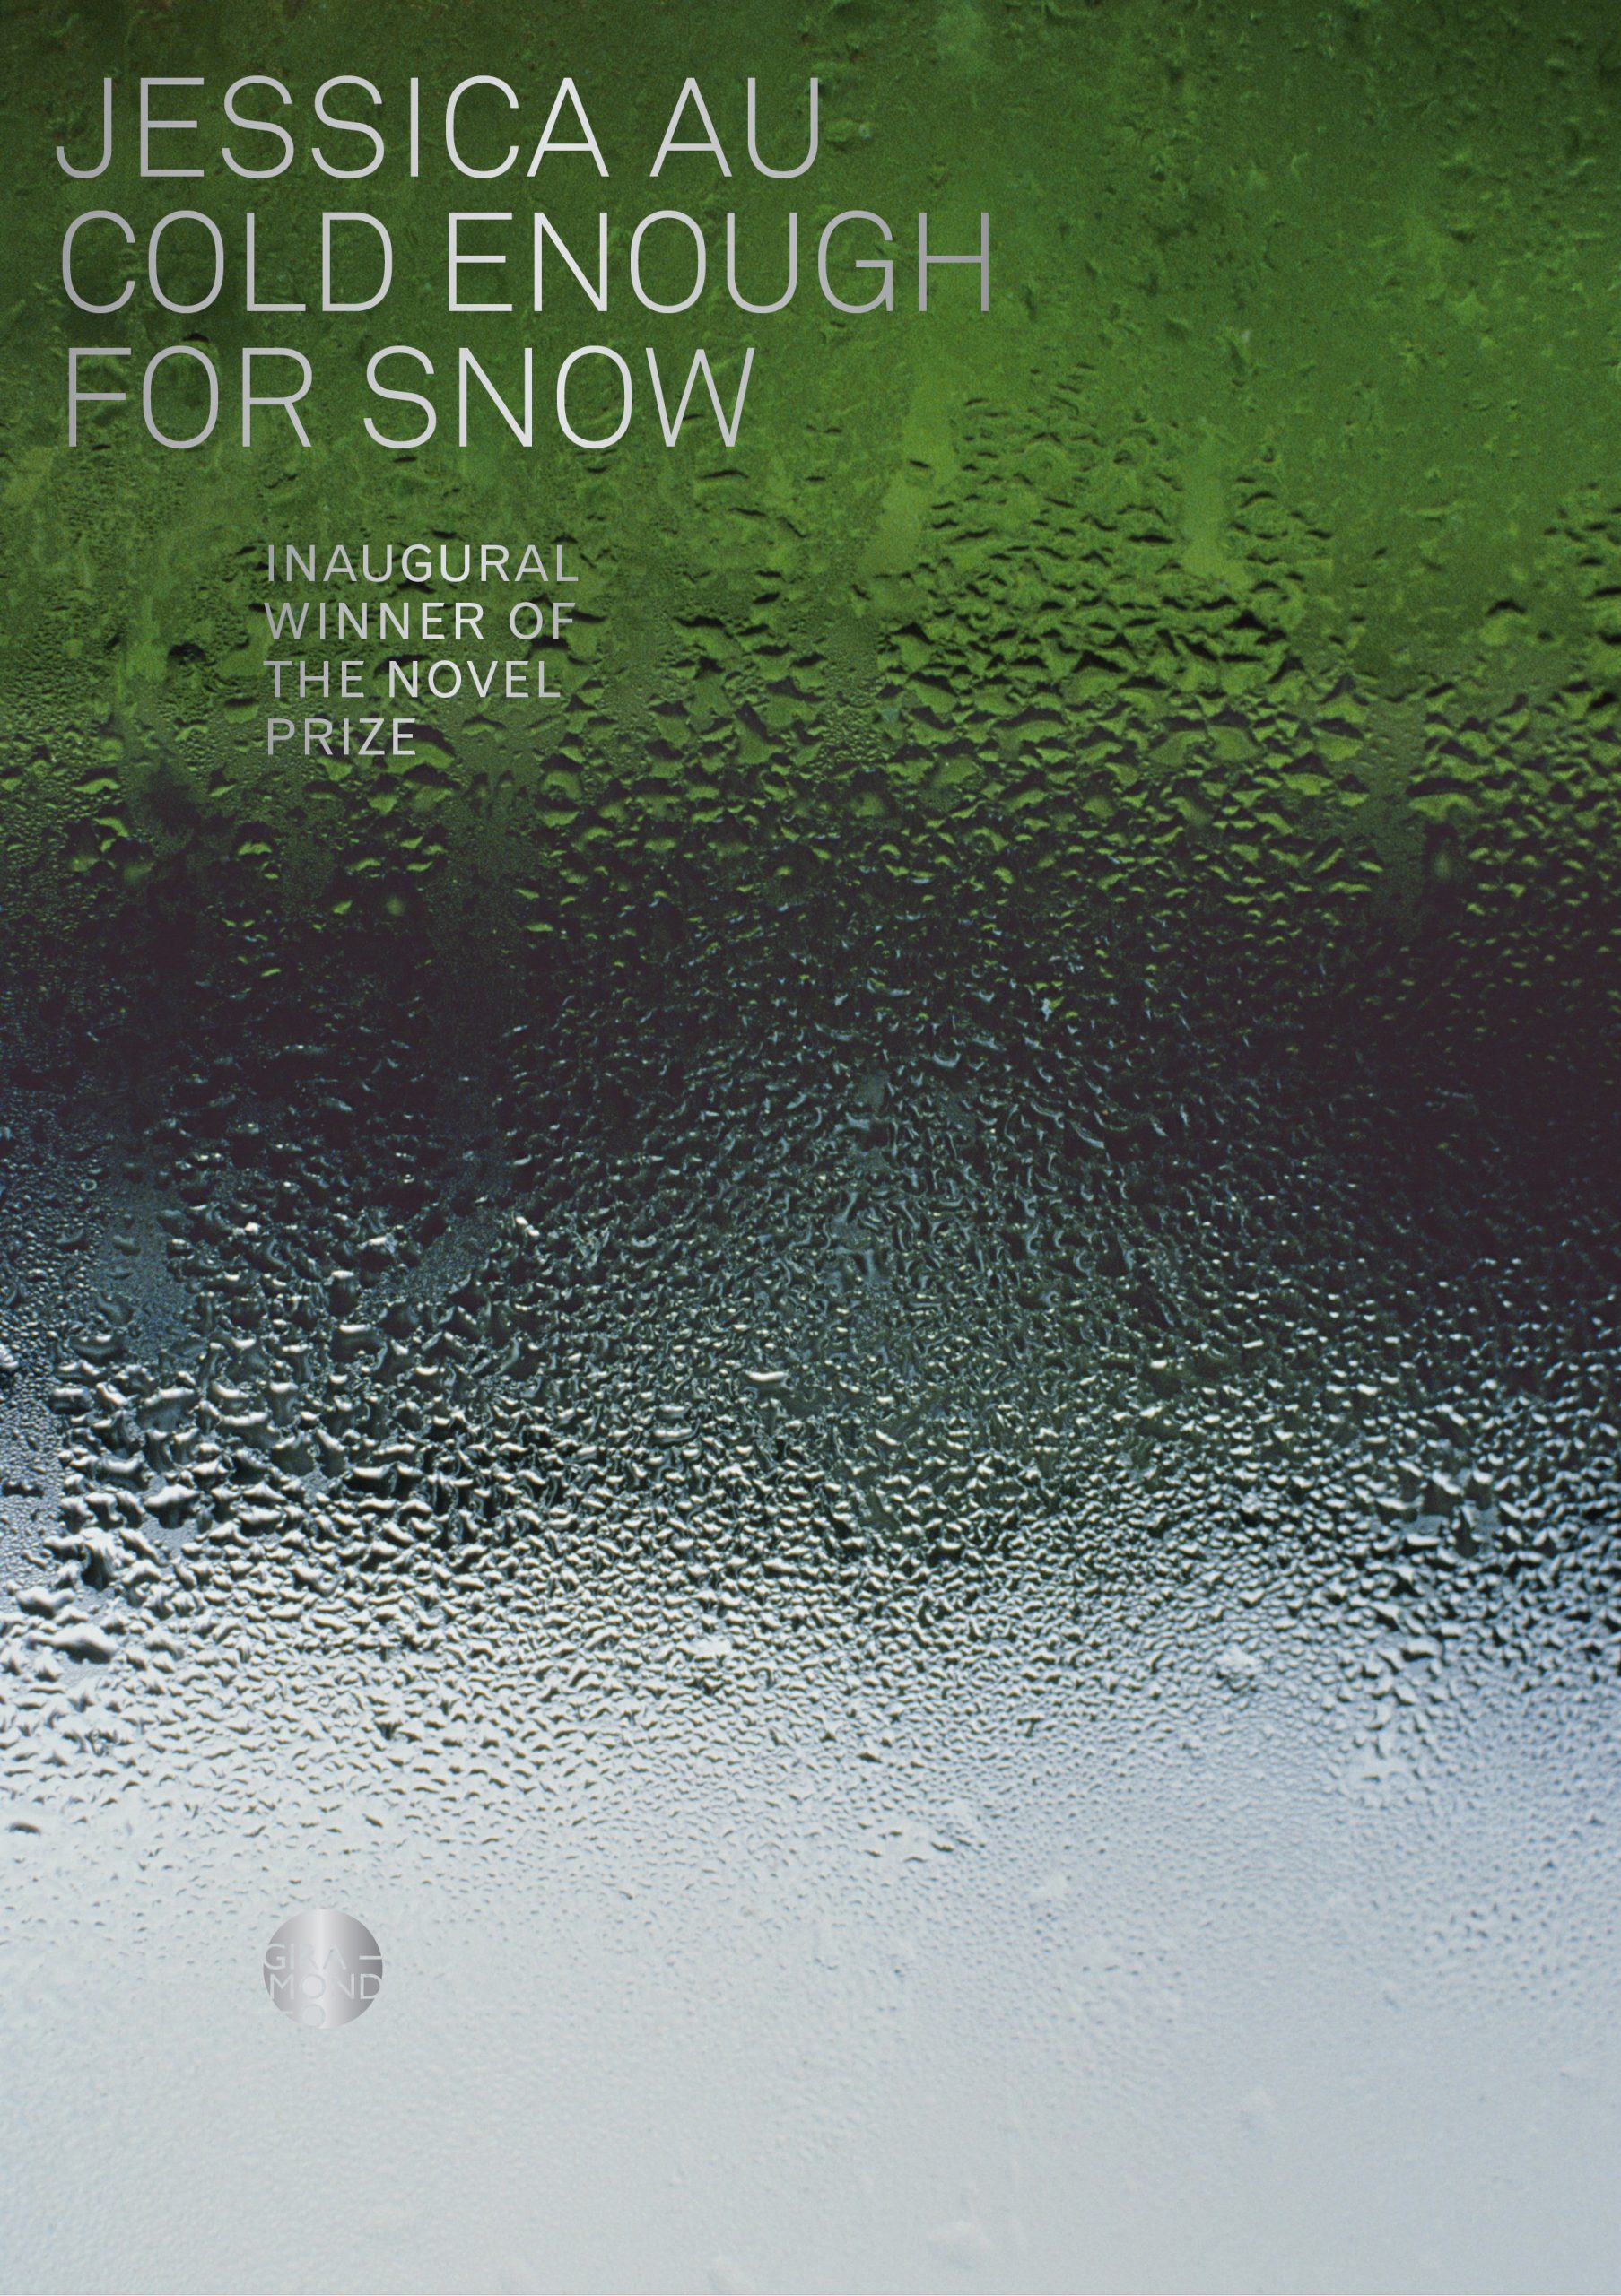 A book cover that shows condensation on green then clear glass. The cover reads "Jessica Au / Cold Enough for Snow"